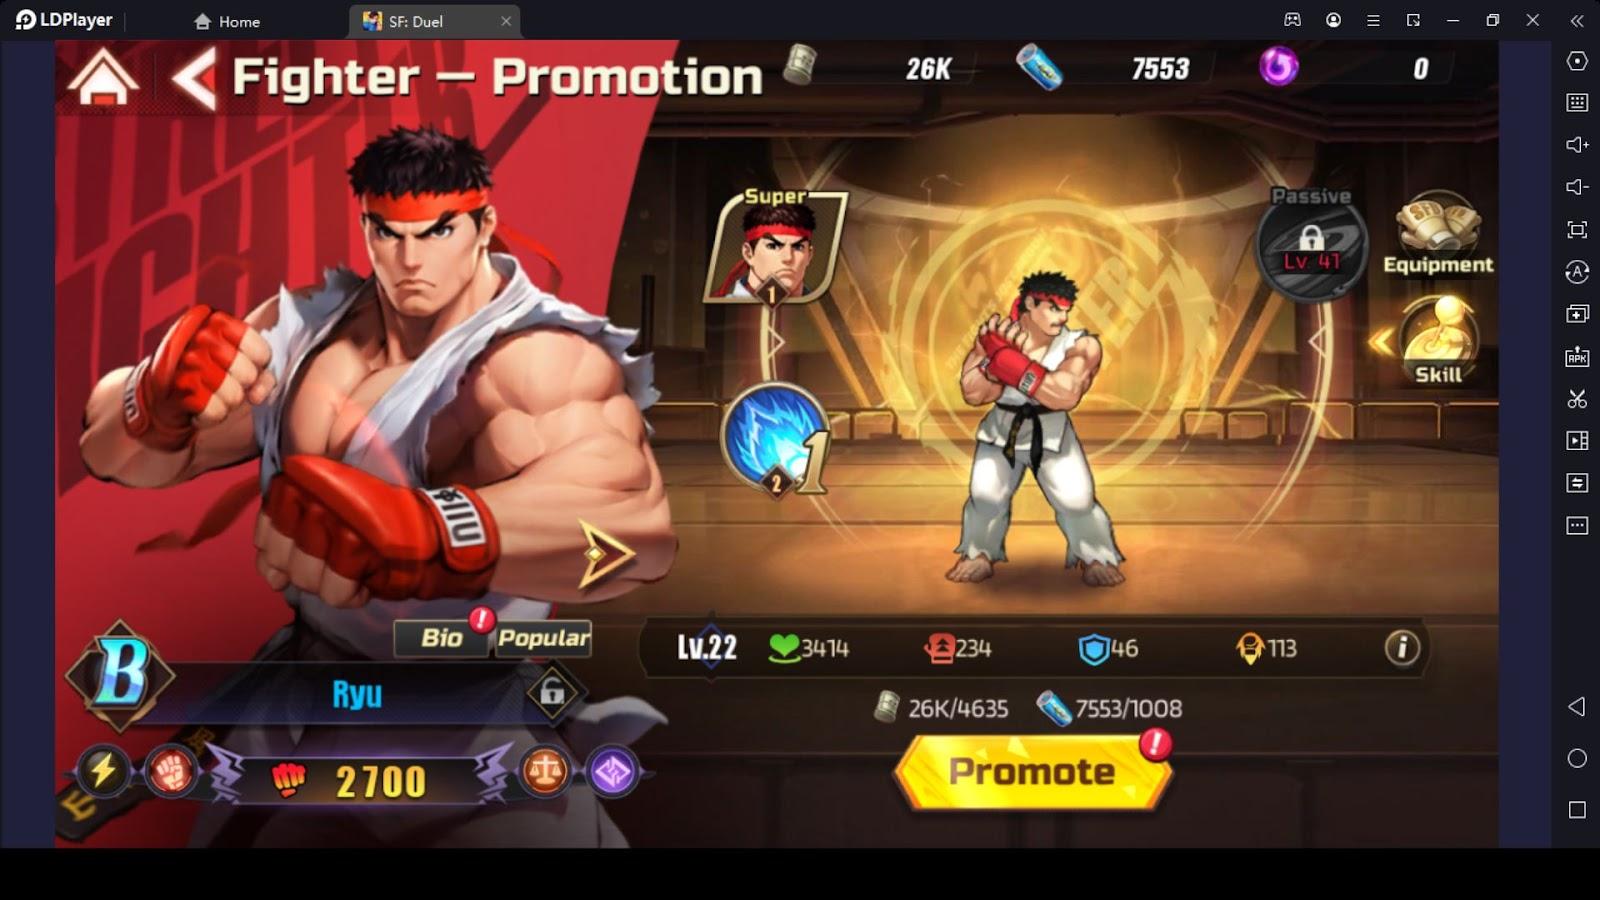 Street Fighter: Duel Review: A mobile reminder of SF IV's greatness